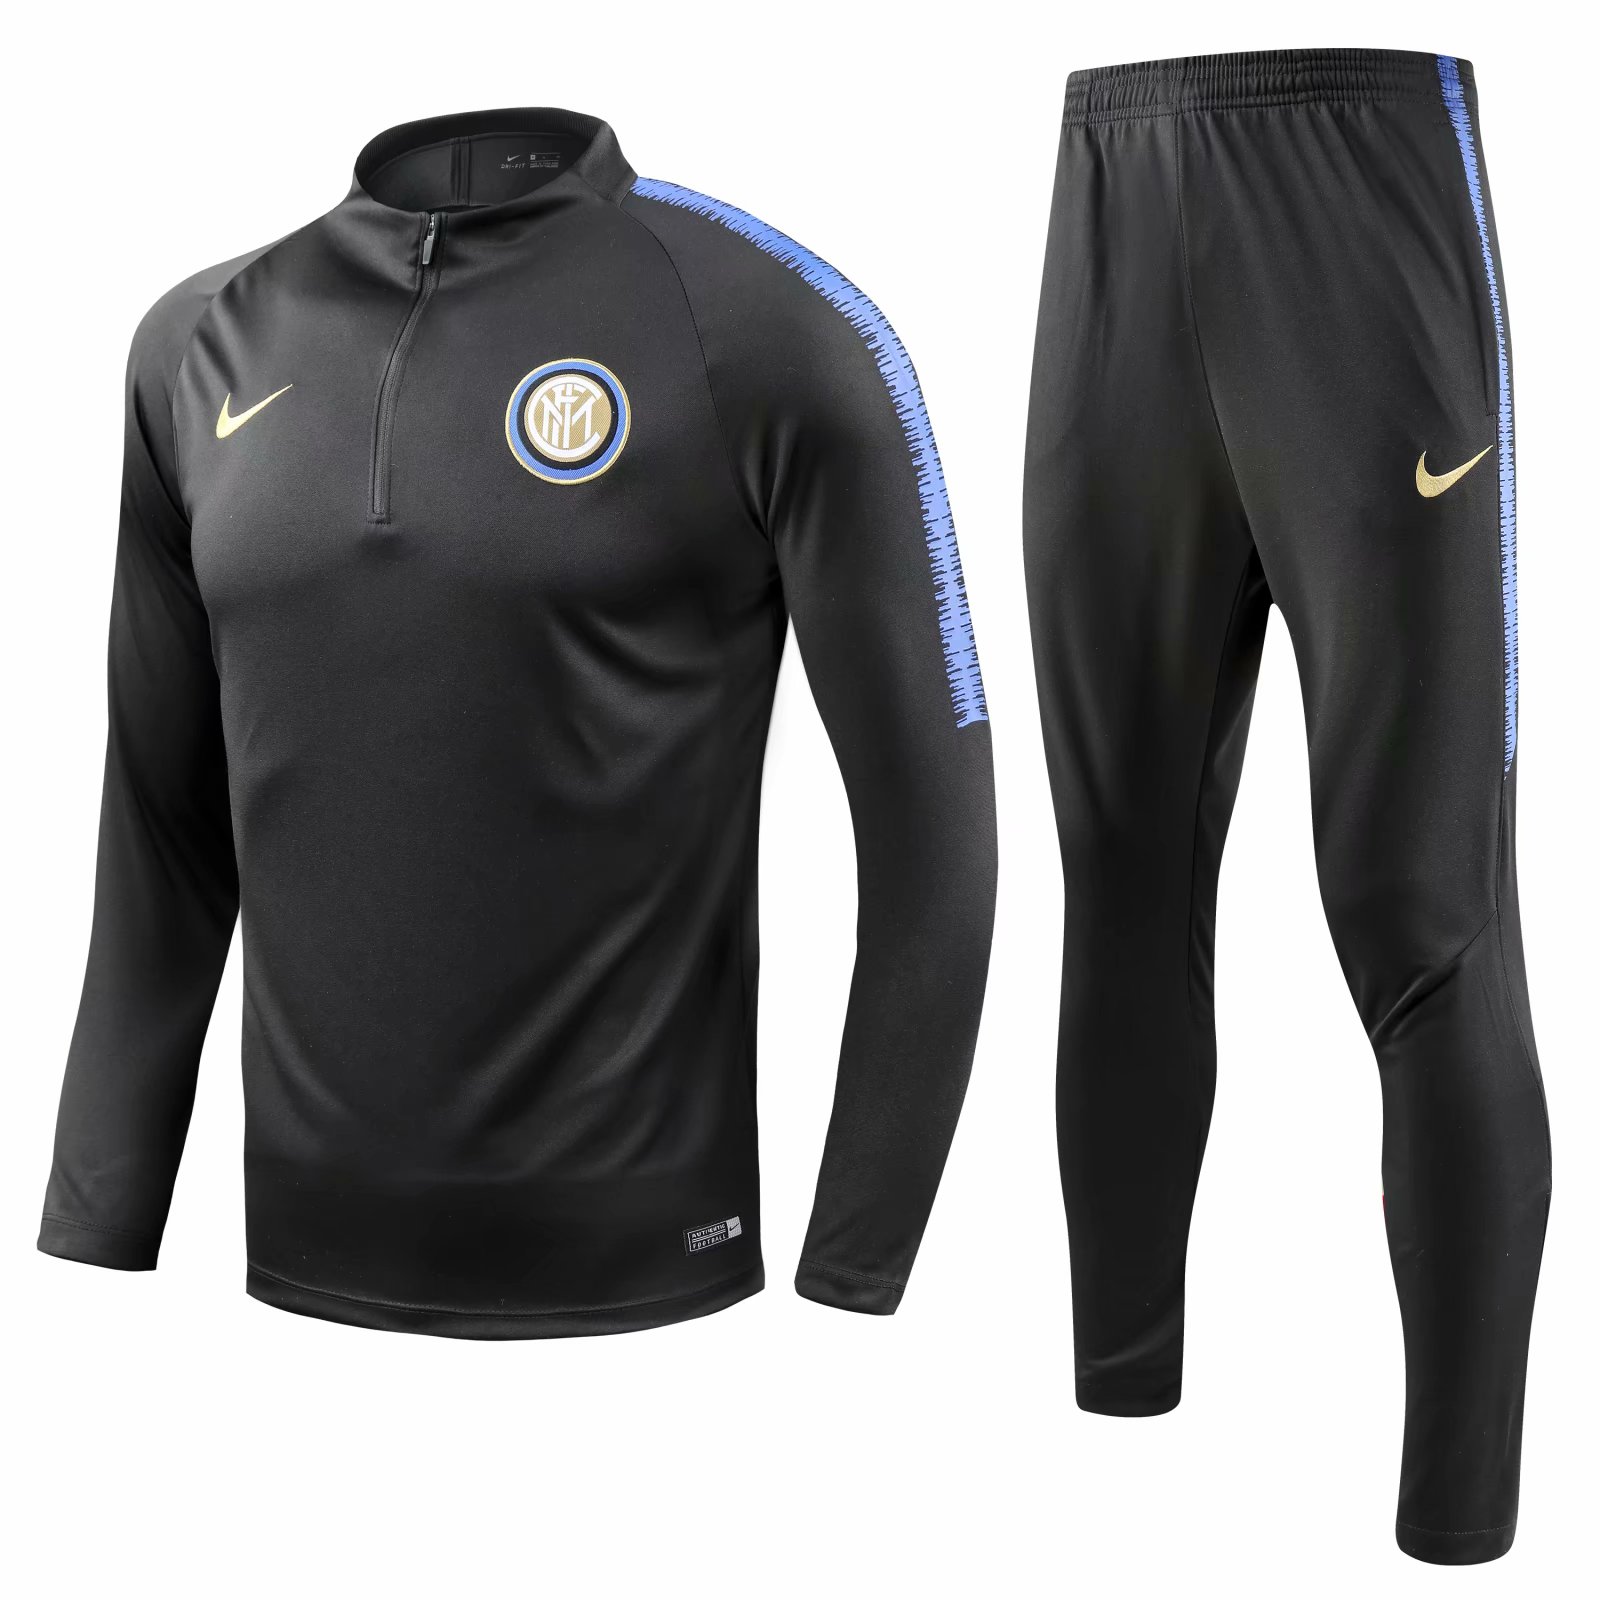 Adult Tracksuits Sport Gear,Adult Tracksuits Soccer Uniforms,Adult ...